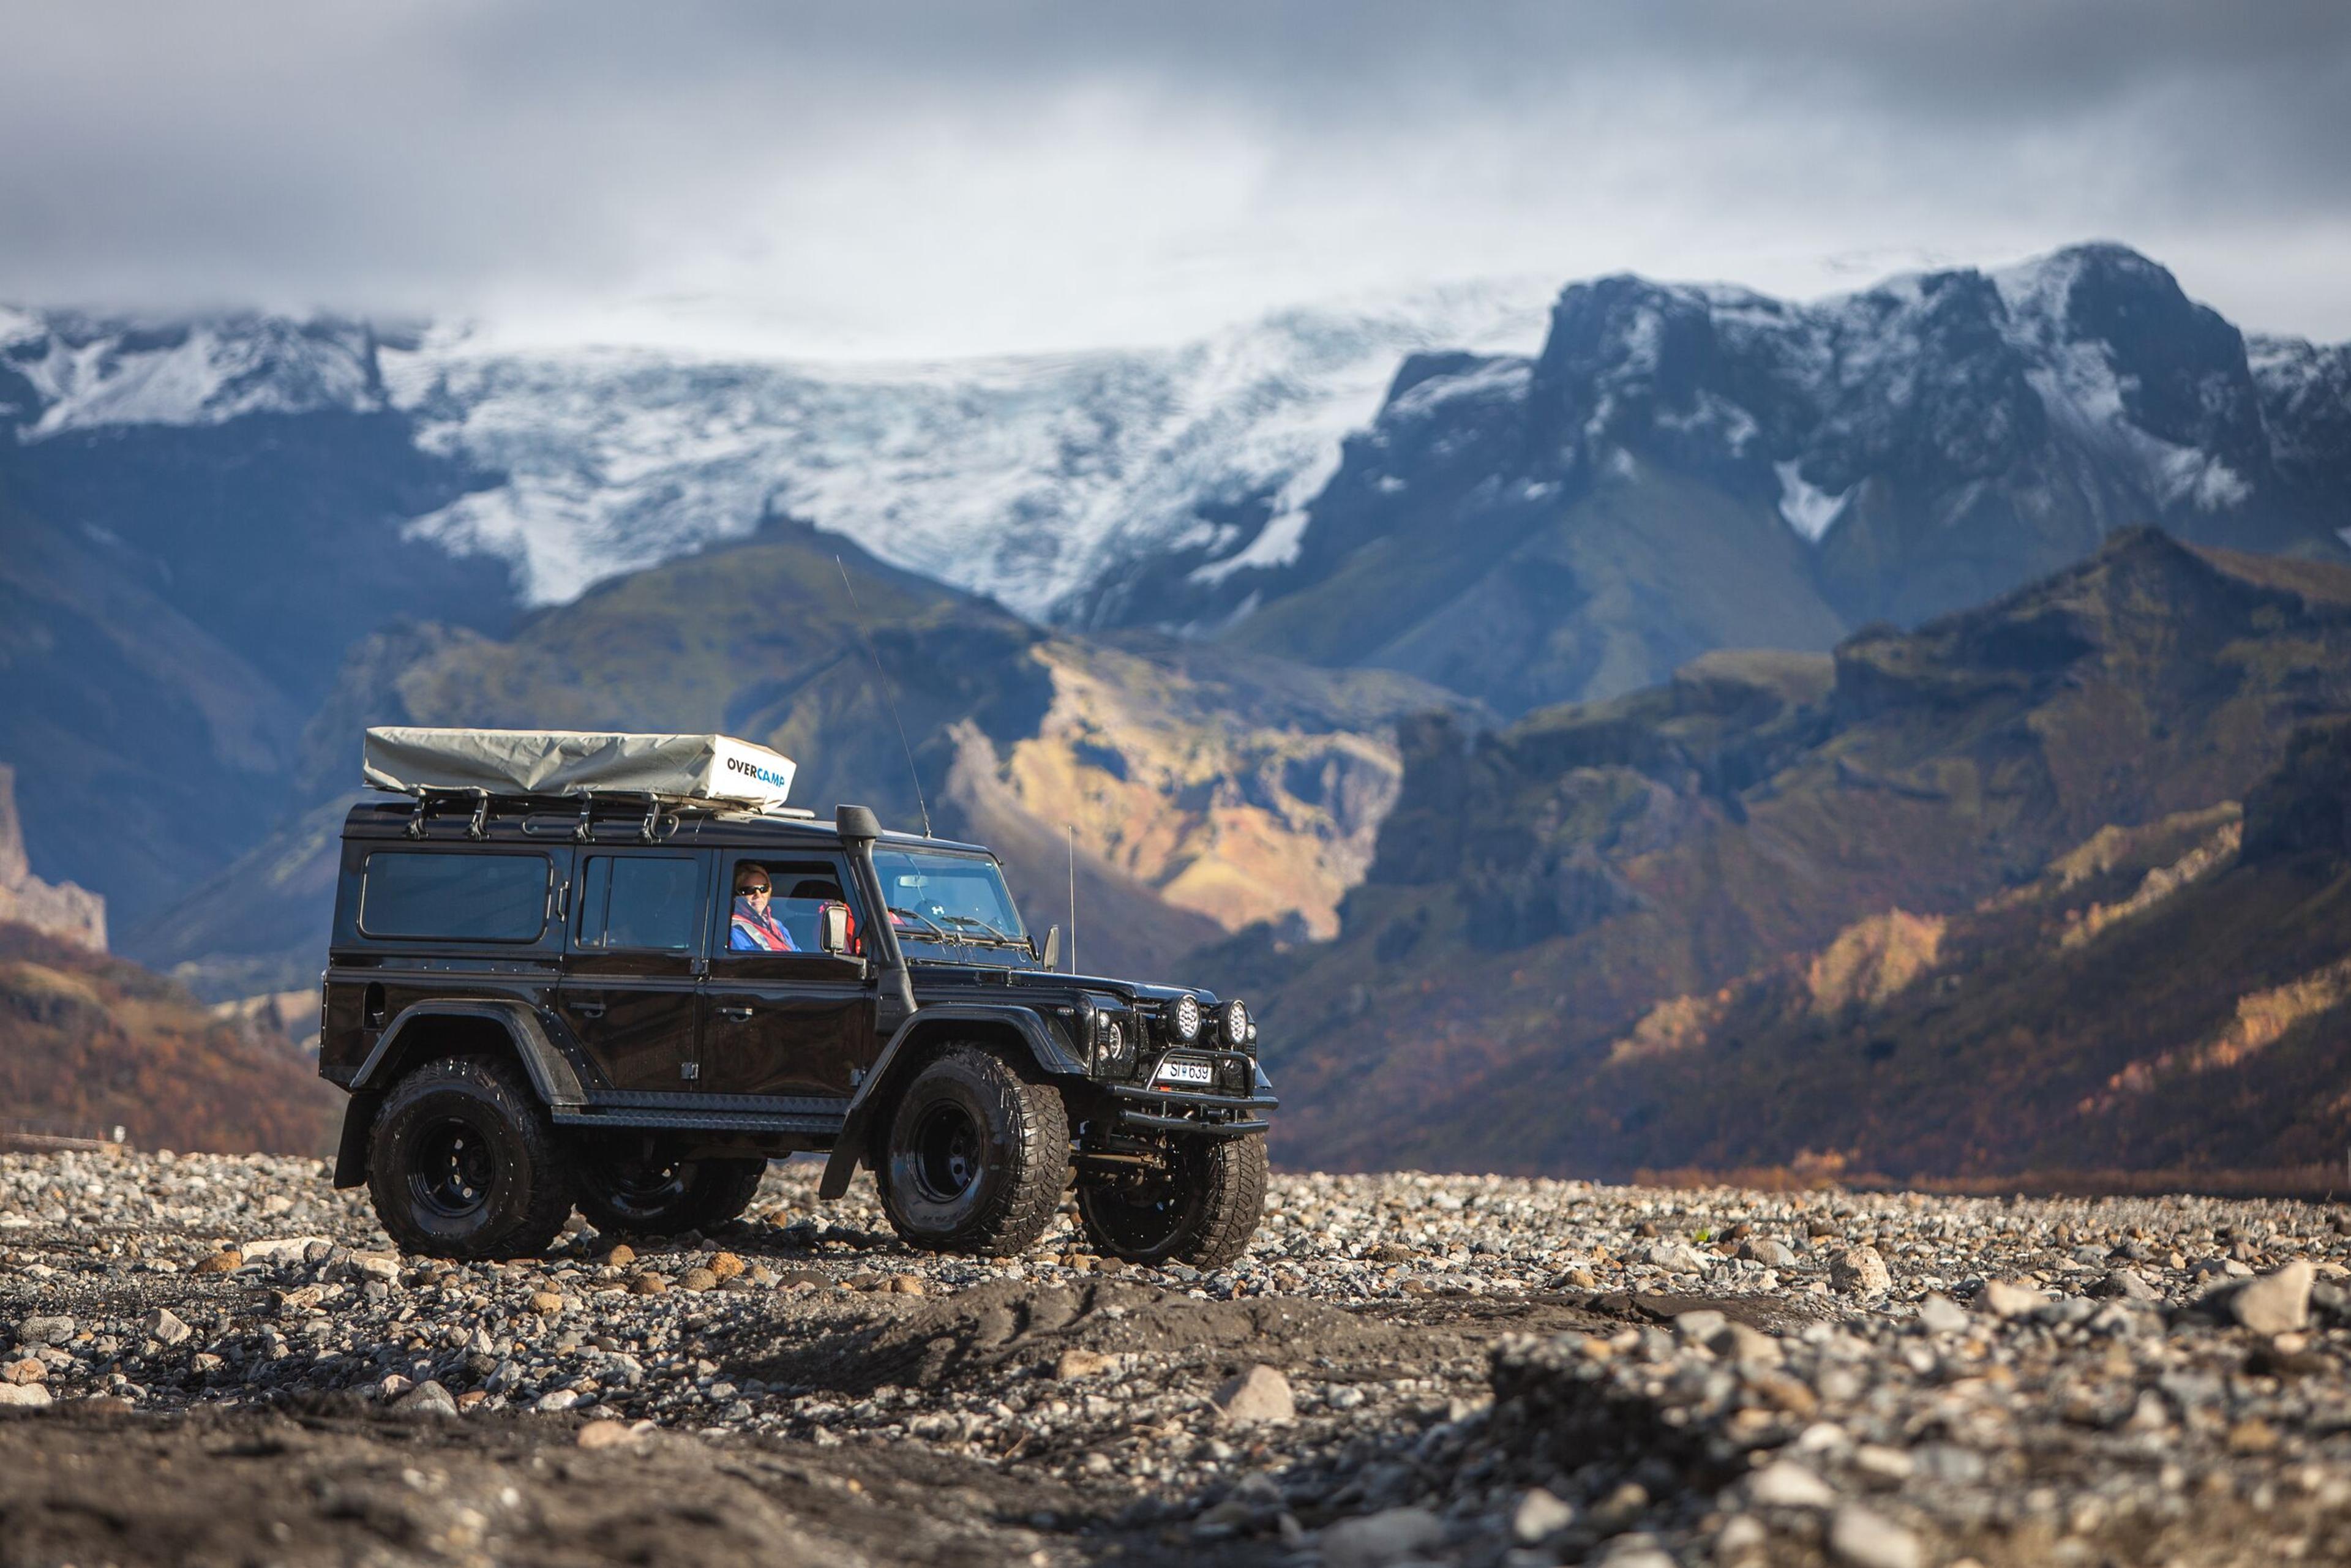 A substantial jeep amidst rugged terrain, with a glacier majestically framing the background.